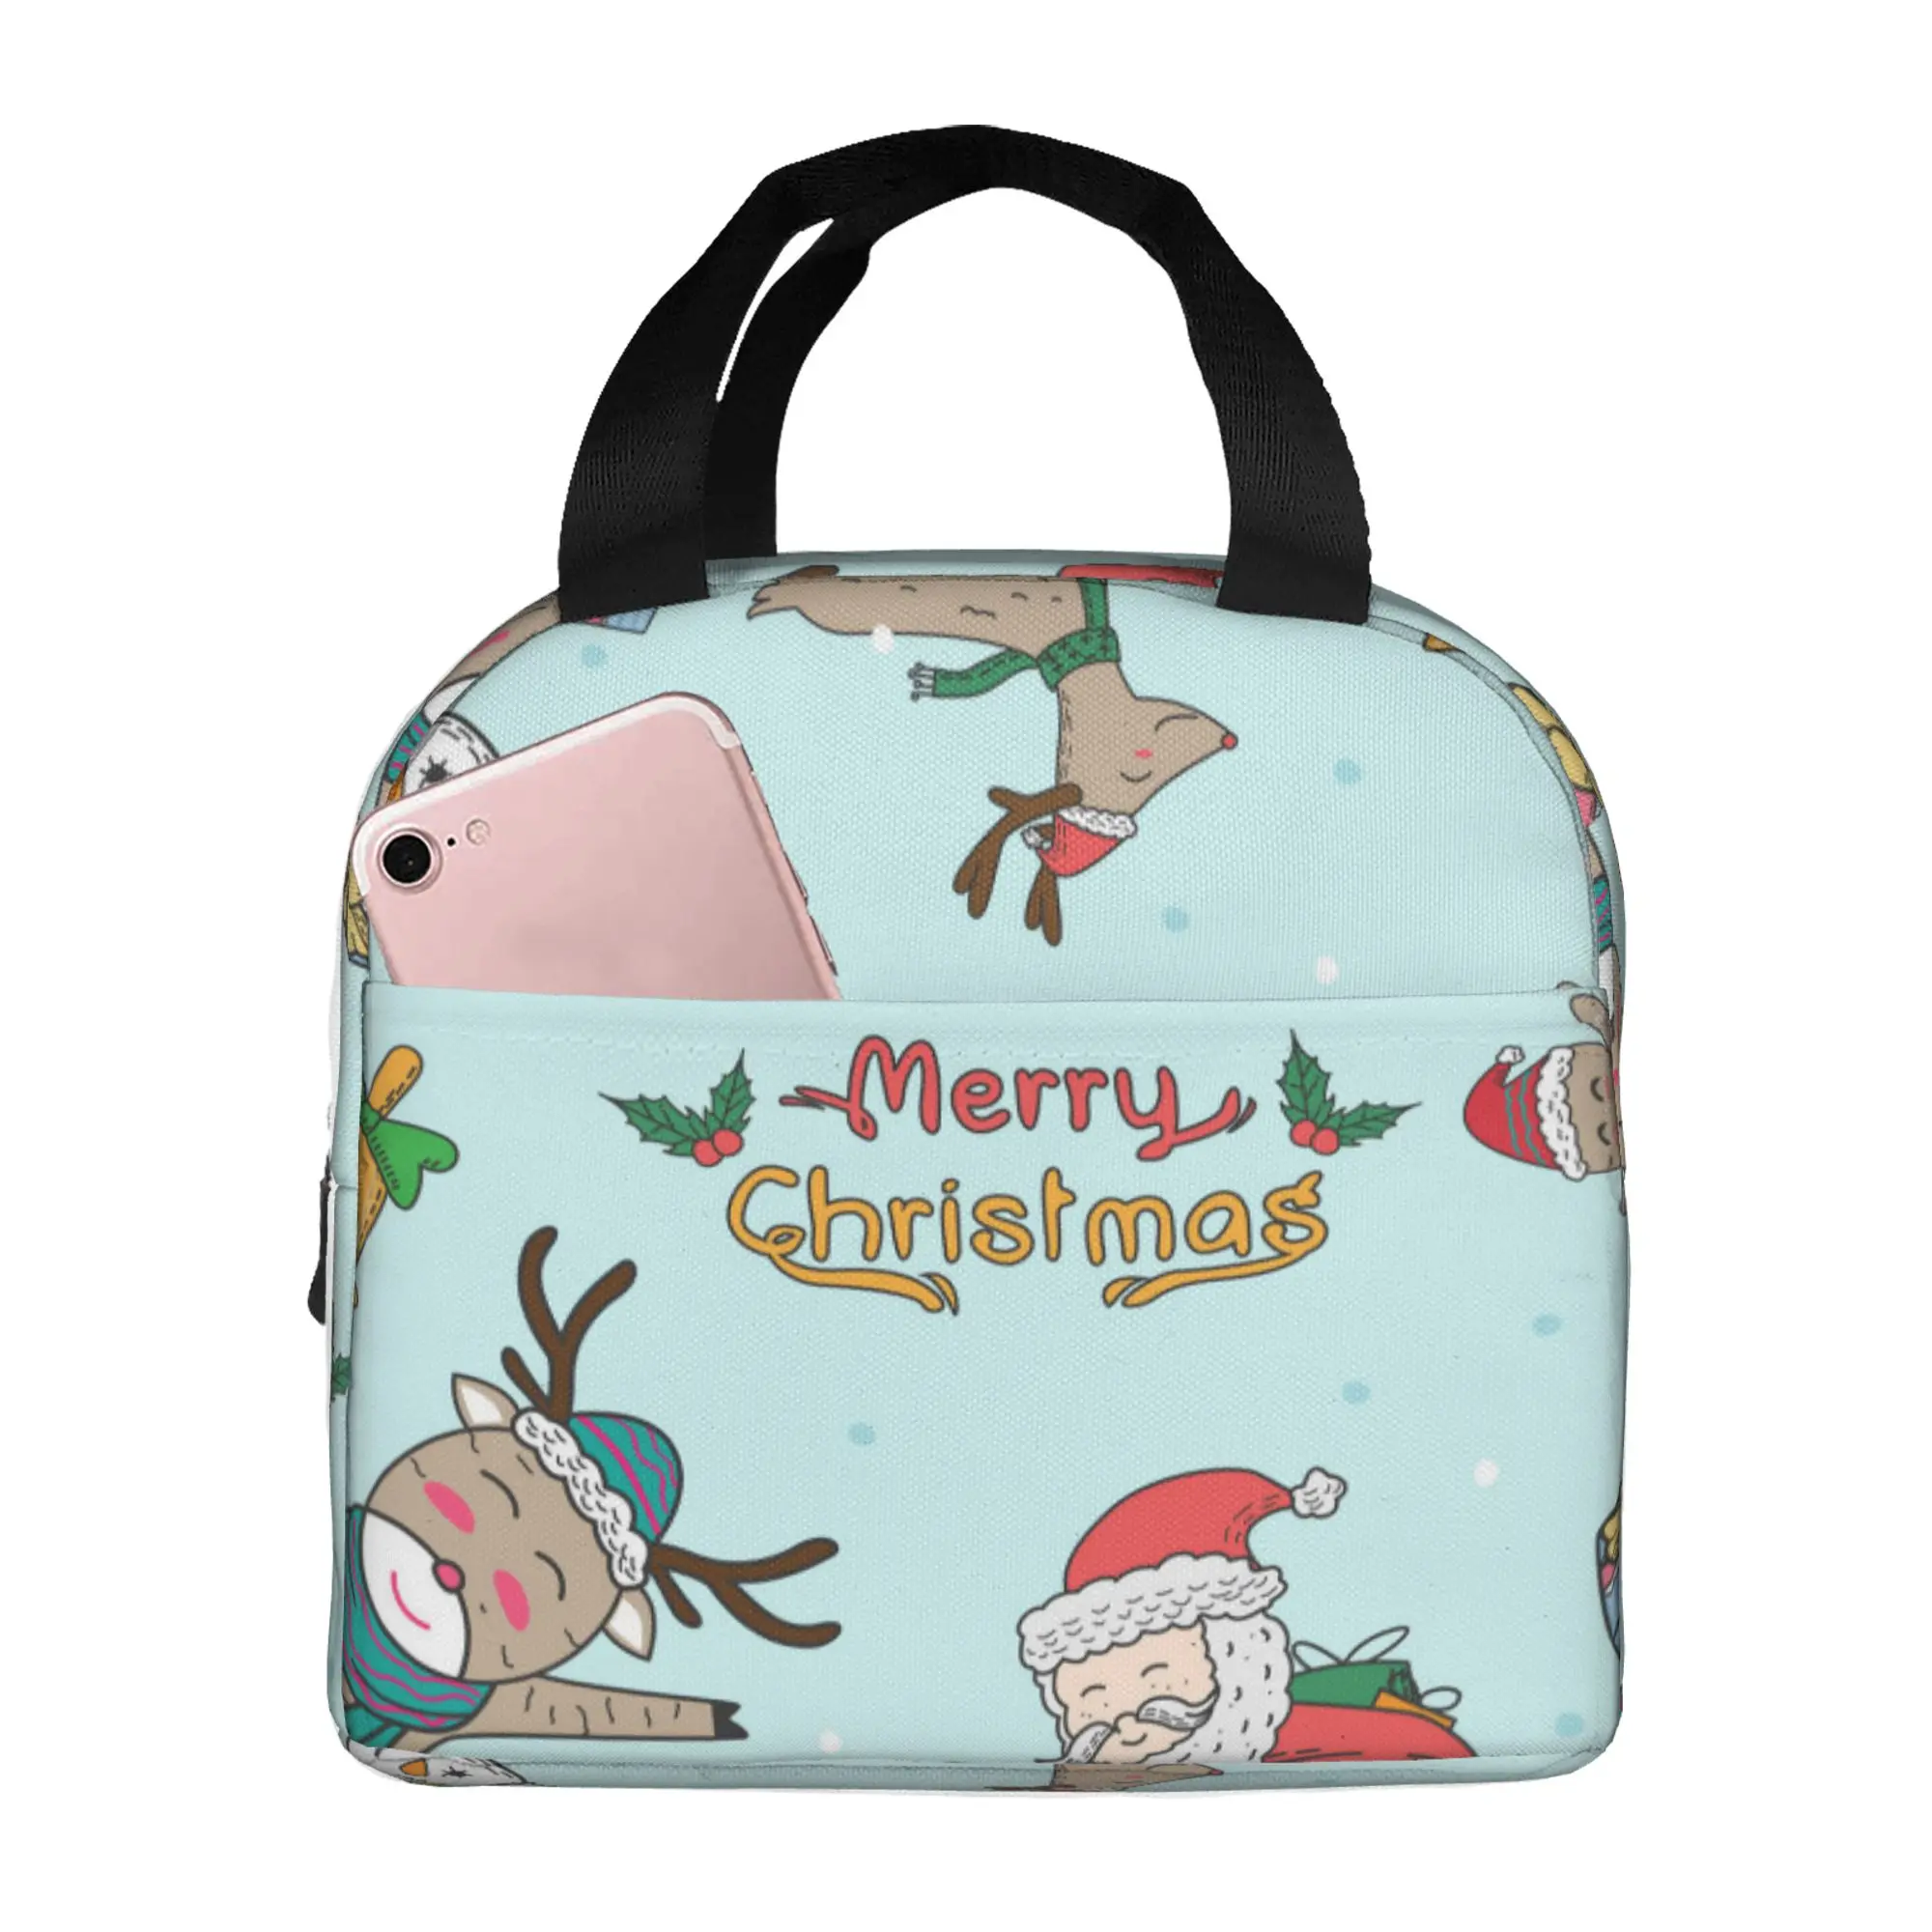 

Christmas Elements Cartoons Doodle Lunch Bag for Women Large Reusable Insulated Lunch Box for Work, Adult Foldable Tote for